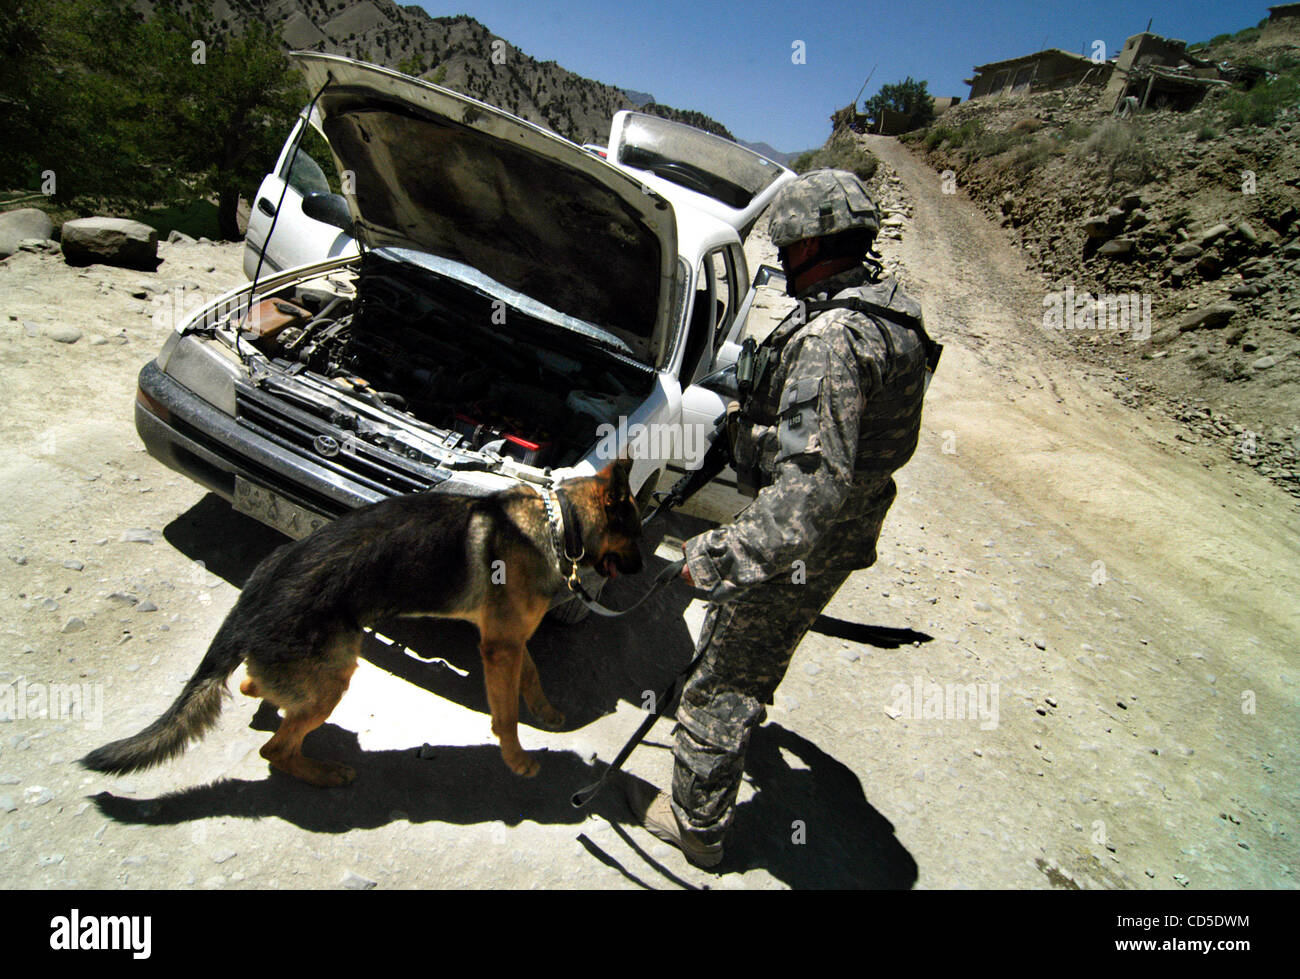 Apr 26, 2008 - Paktya Province, Afghanistan - A military working dog is used to sniff out explosives, as all traffic is stopped on the road outside the district center for a super shura (meeting) for Paktya provincal leaders, inspecting for VBIEDs (vehicle borne improvised explosive devices).  The s Stock Photo